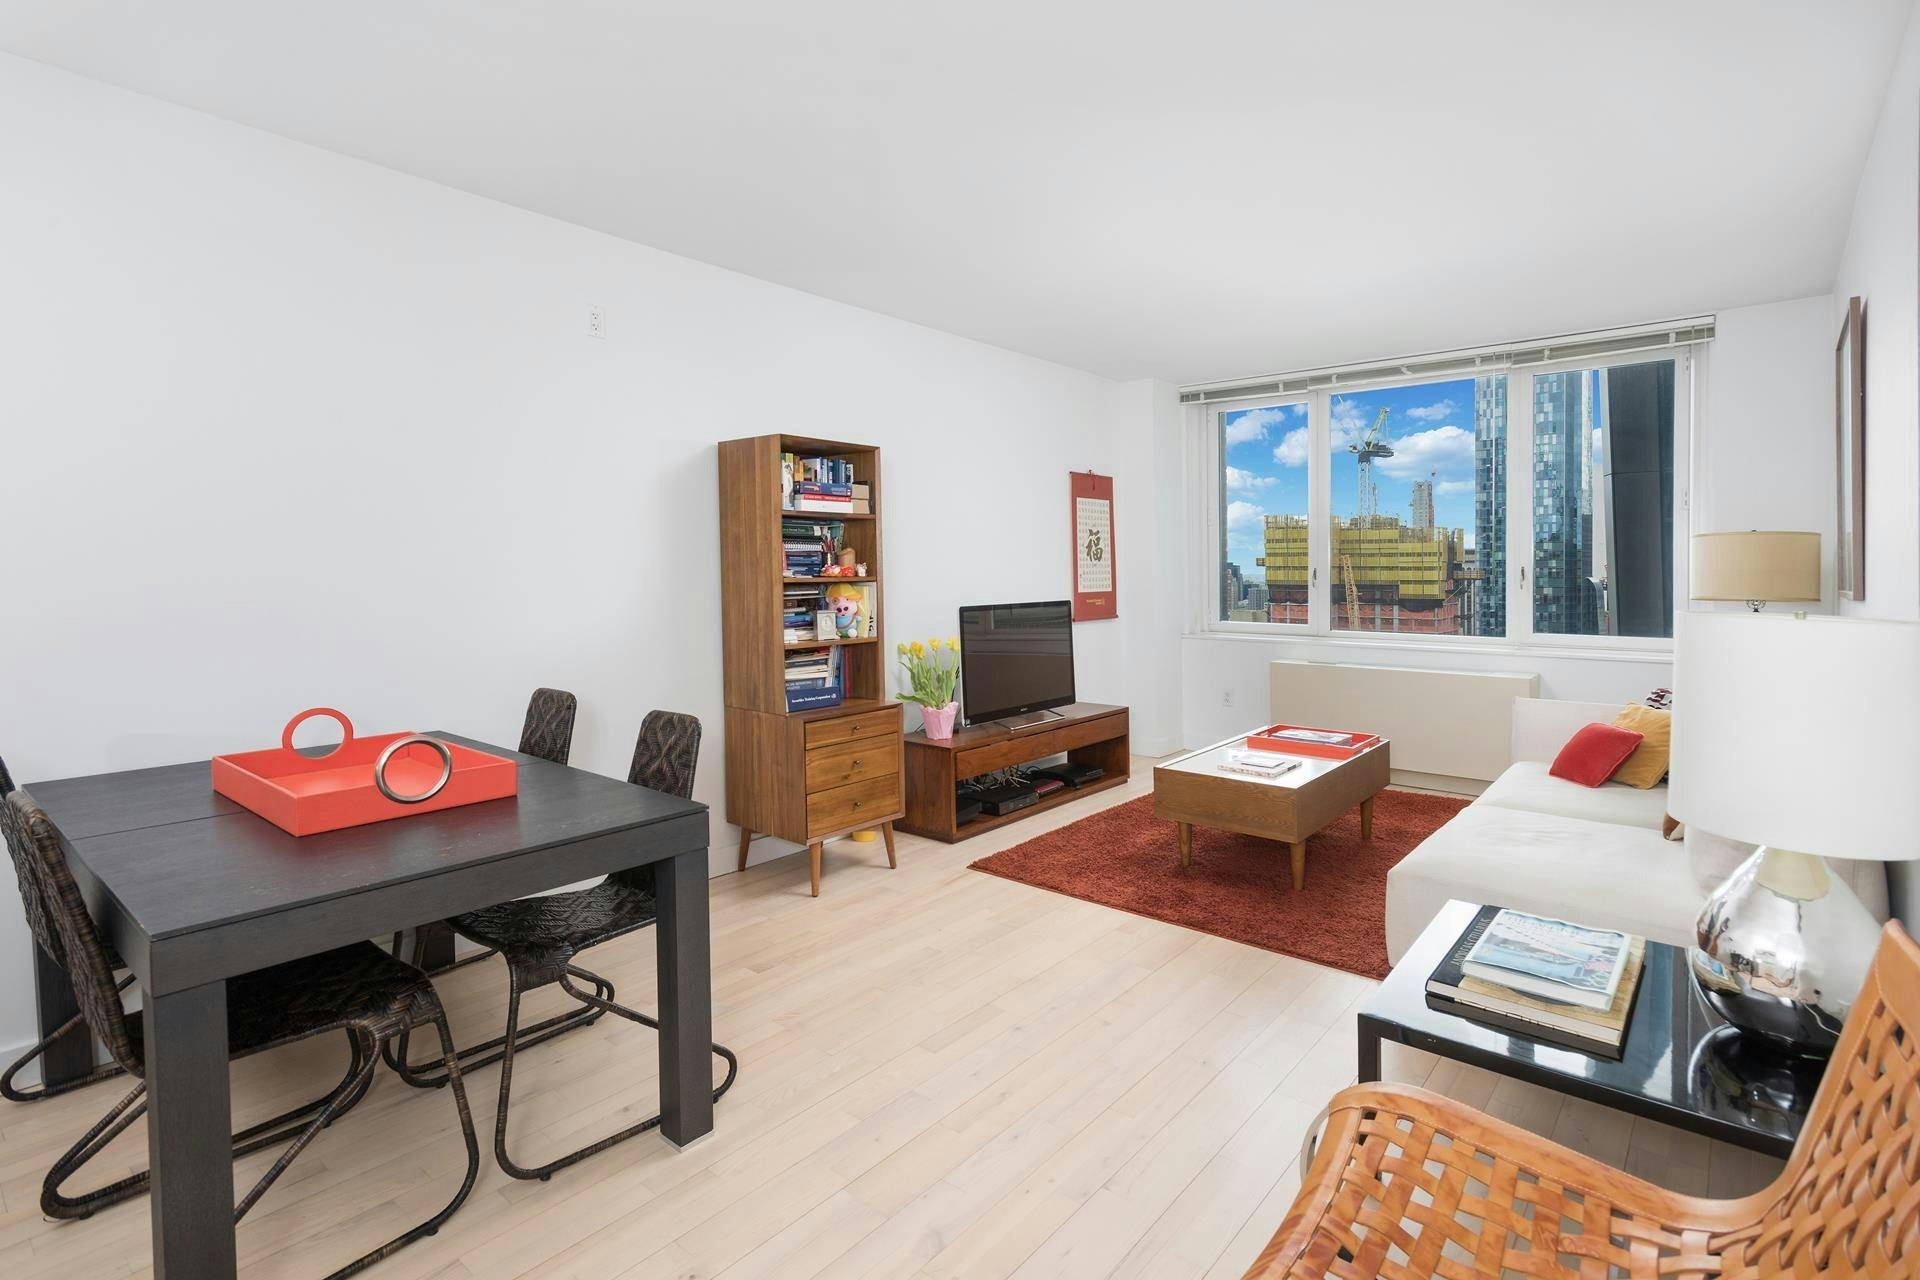 2 Bed, 2 Bath Rental, on the 51st Floor with Open City and Partial Central Park Views.